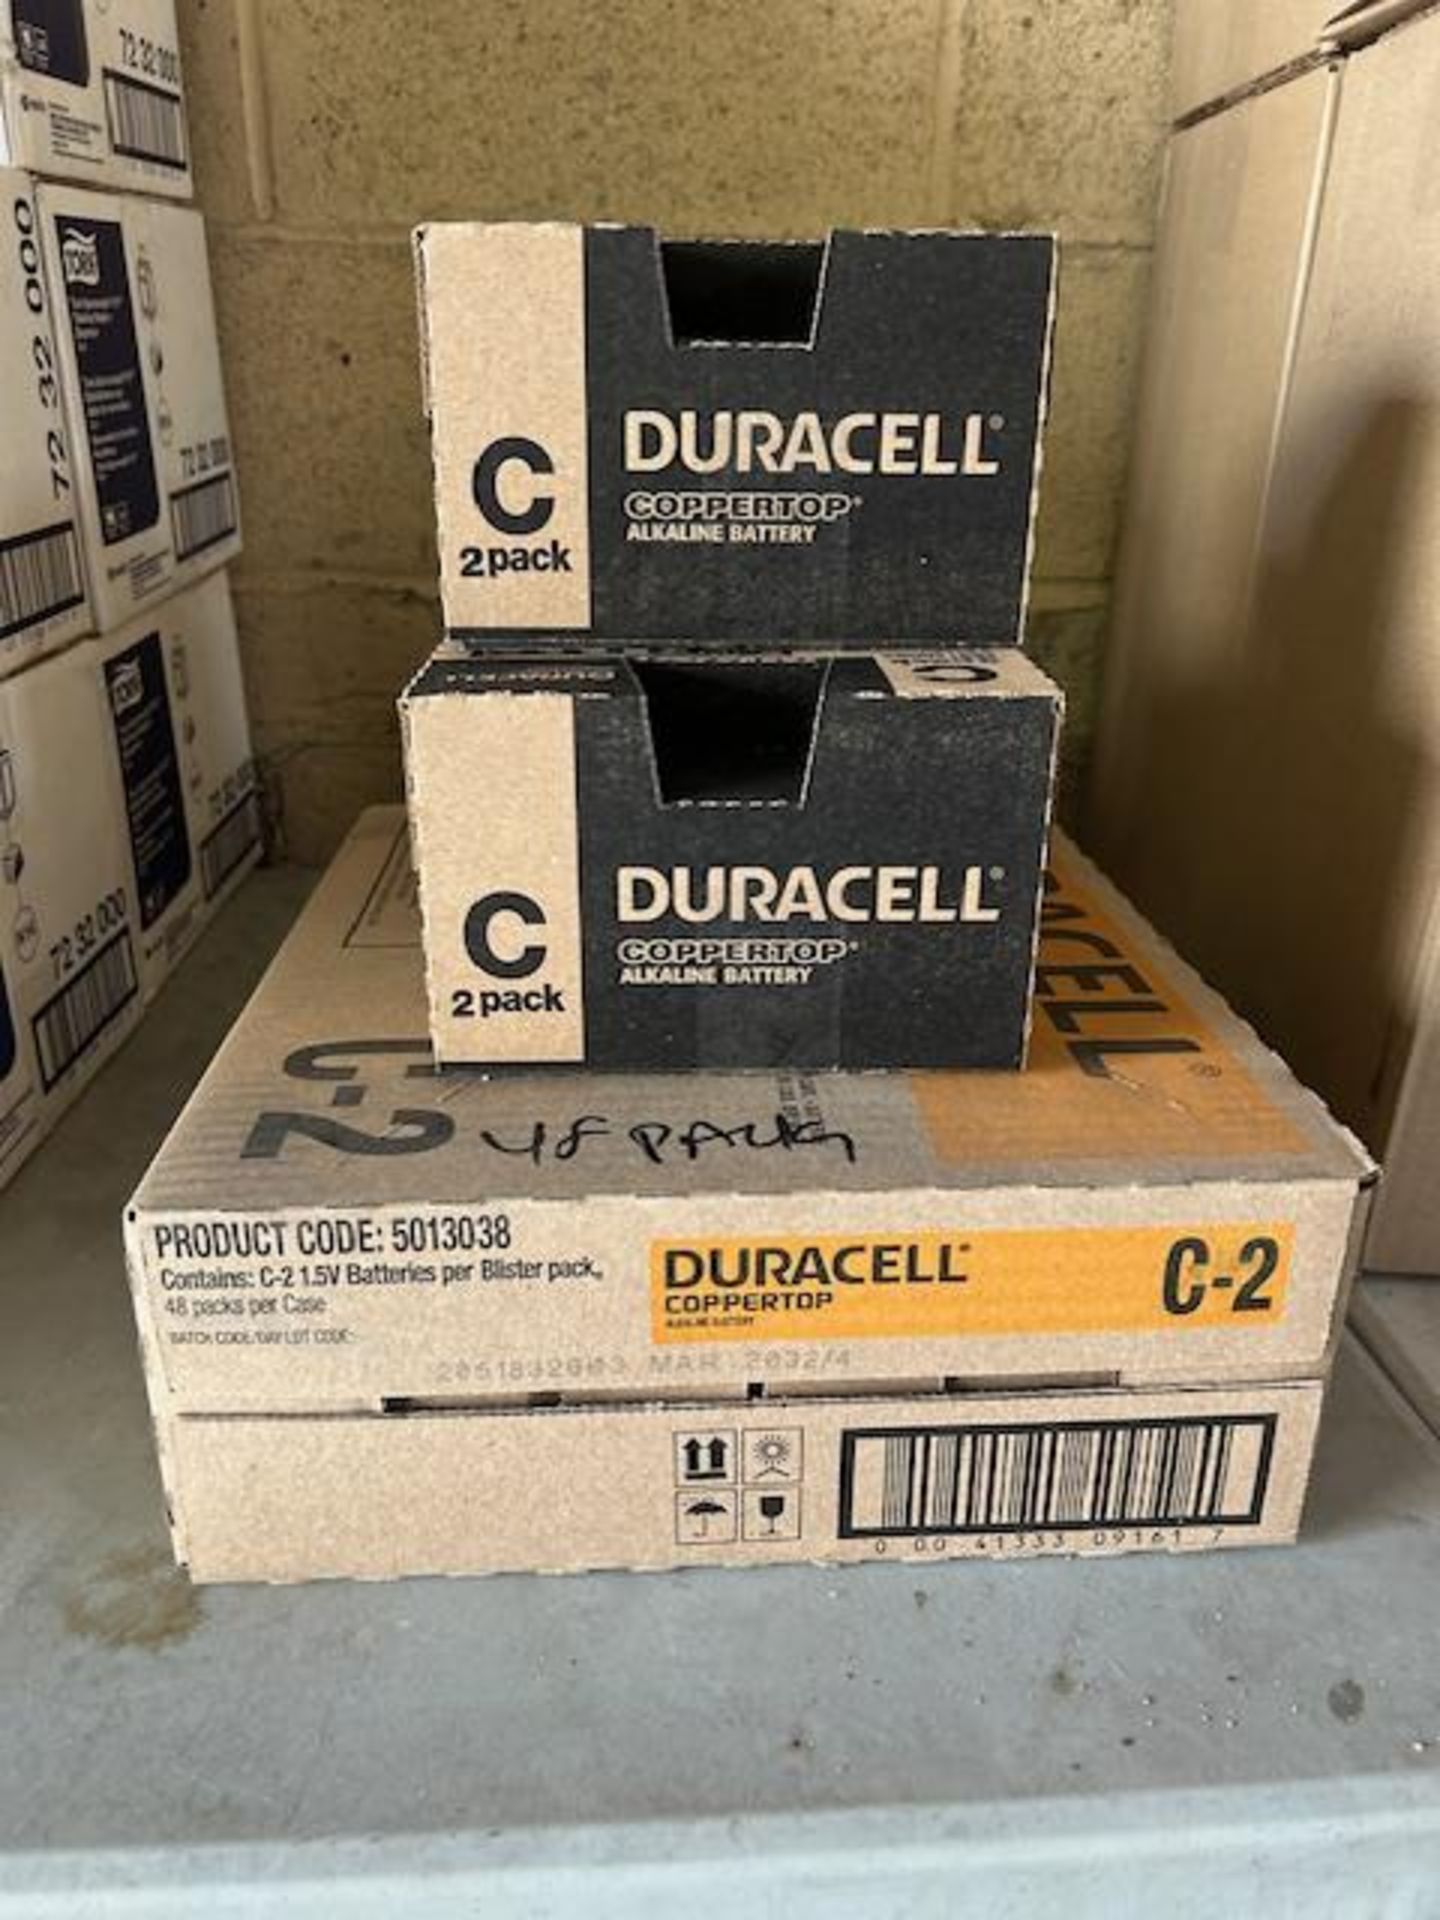 (72) Packs - Duracell 2-Pack C Batteries MN1400B2 (Expires 2032) - Image 2 of 2